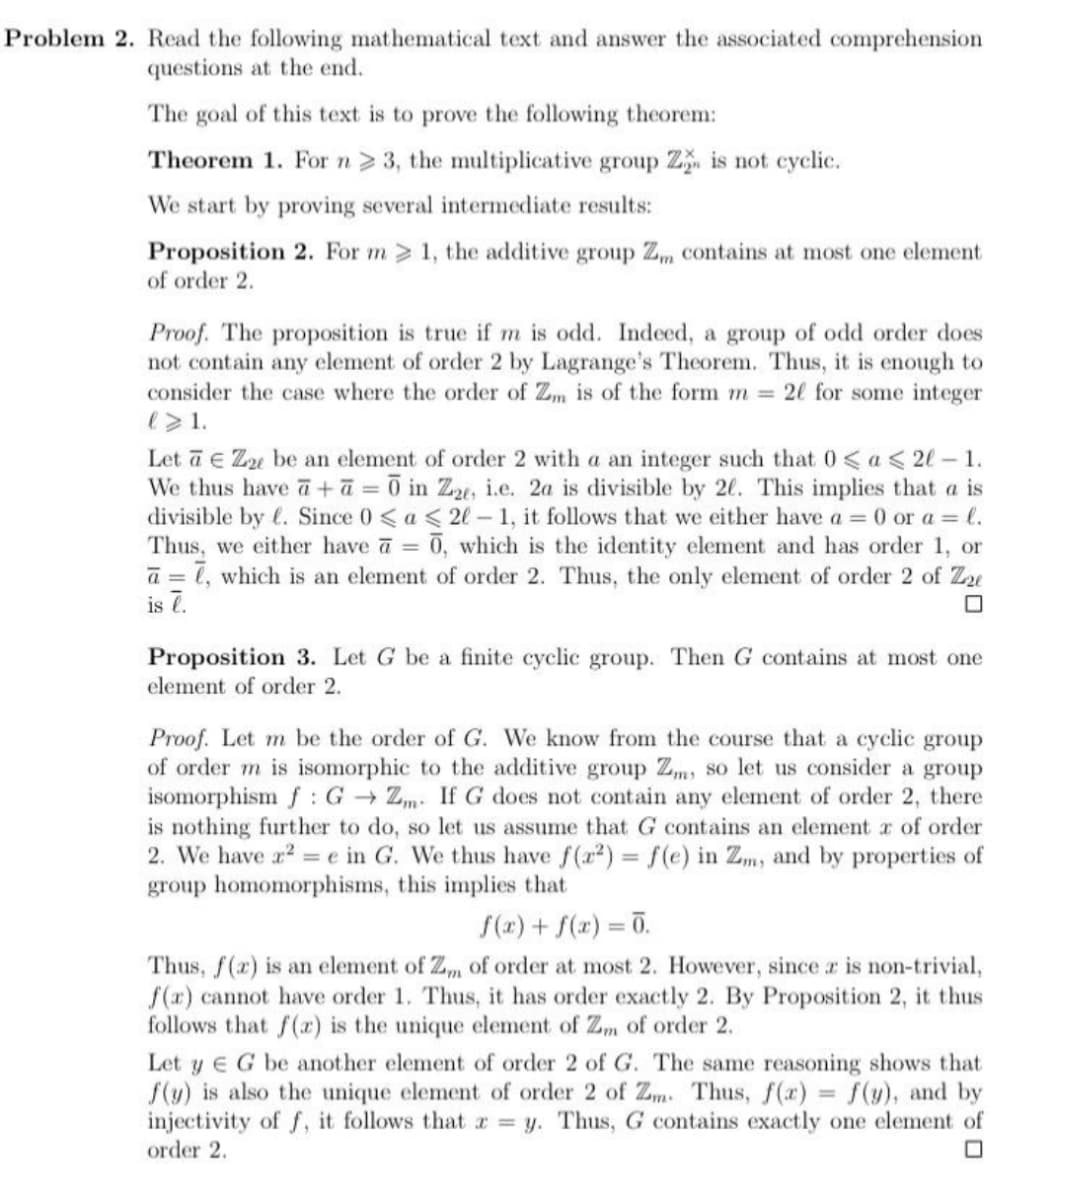 Problem 2. Read the following mathematical text and answer the associated comprehension
questions at the end.
The goal of this text is to prove the following theorem:
Theorem 1. Forn> 3, the multiplicative group Z. is not cyclic.
We start by proving several intermediate results:
Proposition 2. For m 1, the additive group Z contains at most one element
of order 2.
Proof. The proposition is true if m is odd. Indeed, a group of odd order does
not contain any element of order 2 by Lagrange's Theorem. Thus, it is enough to
consider the case where the order of Zm is of the form m = 20 for some integer
e>1.
Let ā e Zu be an element of order 2 with a an integer such that 0 < a < 2l – 1.
We thus have a +ā = 0 in Z2e, i.e. 2a is divisible by 20. This implies that a is
divisible by l. Since 0 < a < 2l-1, it follows that we either have a 0 or a = l.
Thus, we either have a =
0, which is the identity element and has order 1, or
a = 1, which is an element of order 2. Thus, the only element of order 2 of Zu
is 7.
Proposition 3. Let G be a finite cyclic group. Then G contains at most one
element of order 2.
Proof. Let m be the order of G. We know from the course that a cyclic group
of order m is isomorphic to the additive group Zm, so let us consider a group
isomorphism f : G → Zm. If G does not contain any element of order 2, there
is nothing further to do, so let us assume that G contains an element r of order
2. We have a2 = e in G. We thus have f(a2) = f(e) in Zm, and by properties of
group homomorphisms, this implies that
f(r) + f(x) = 0.
%3D
Thus, f(x) is an element of Z, of order at most 2. However, since r is non-trivial,
f(r) cannot have order 1. Thus, it has order exactly 2. By Proposition 2, it thus
follows that f(x) is the unique element of Zm of order 2.
Let y E G be another element of order 2 of G. The same reasoning shows that
f(y) is also the unique element of order 2 of Zm. Thus, f(r) = f(y), and by
injectivity of f, it follows that r = y. Thus, G contains exactly one element of
order 2.
